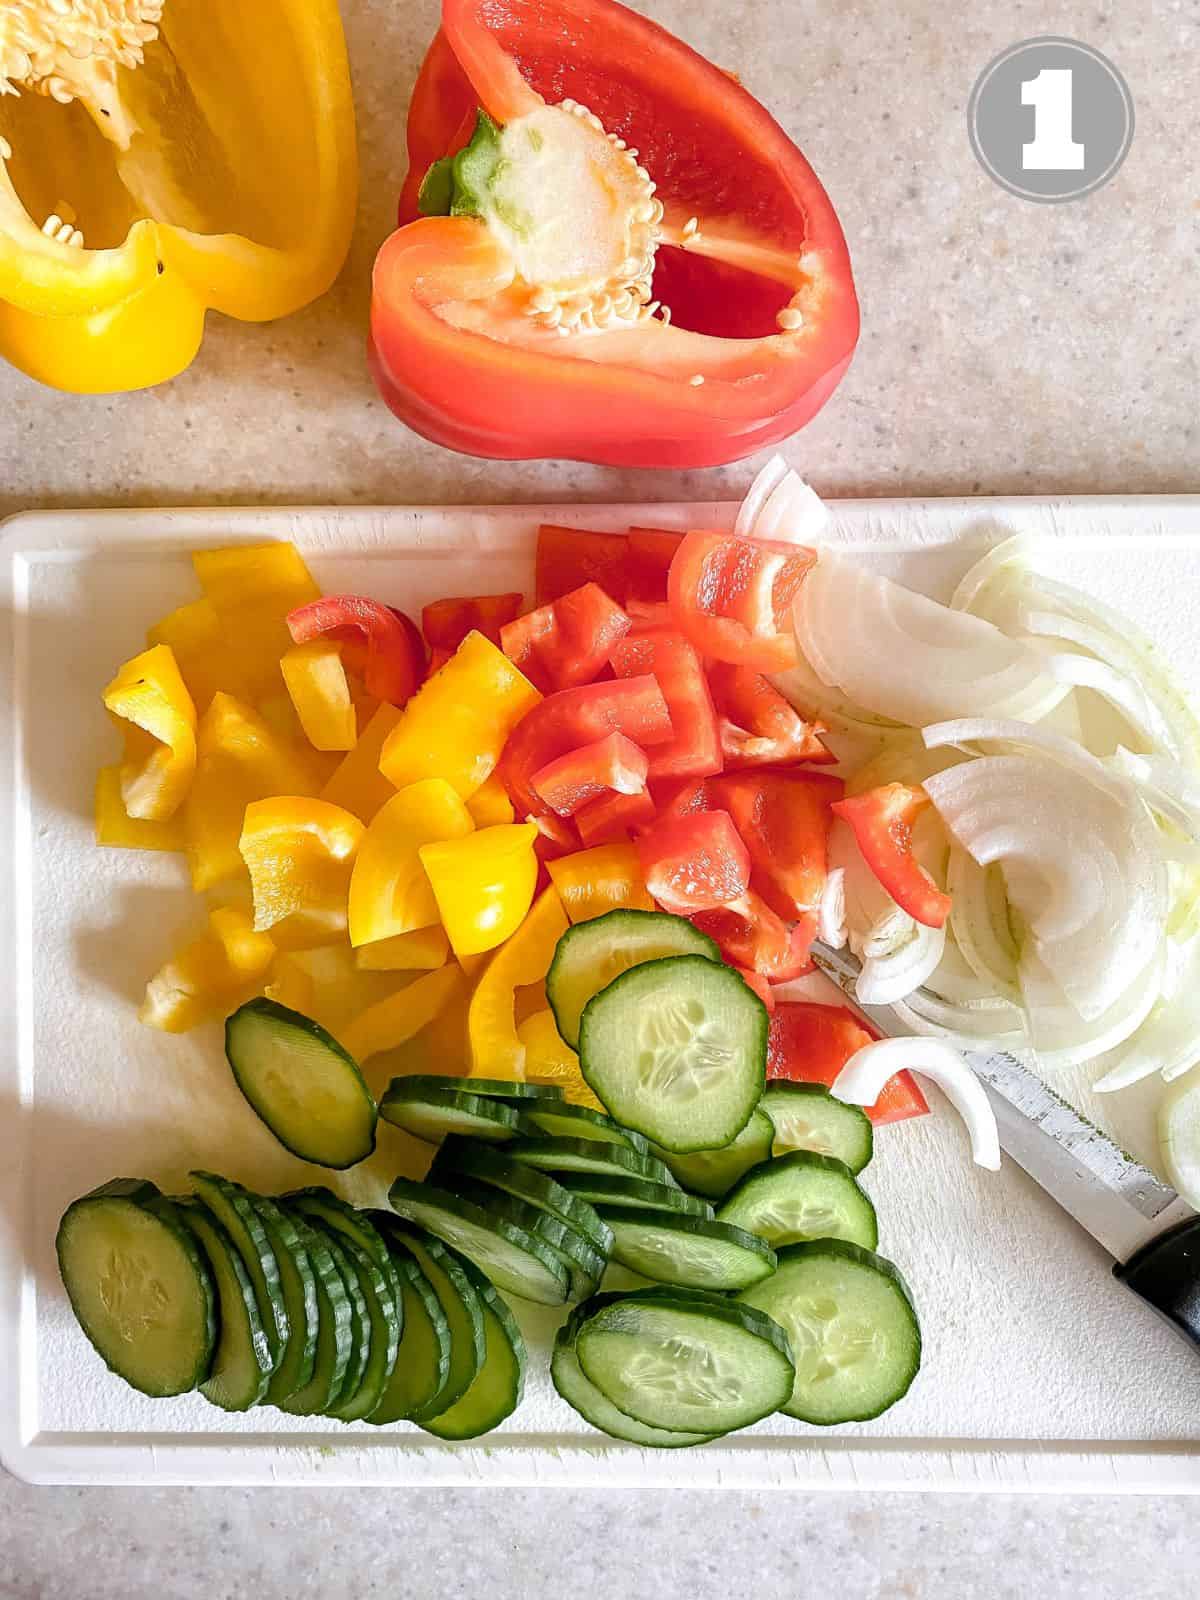 diced bell peppers, onion and cucumber on a white chopping board.